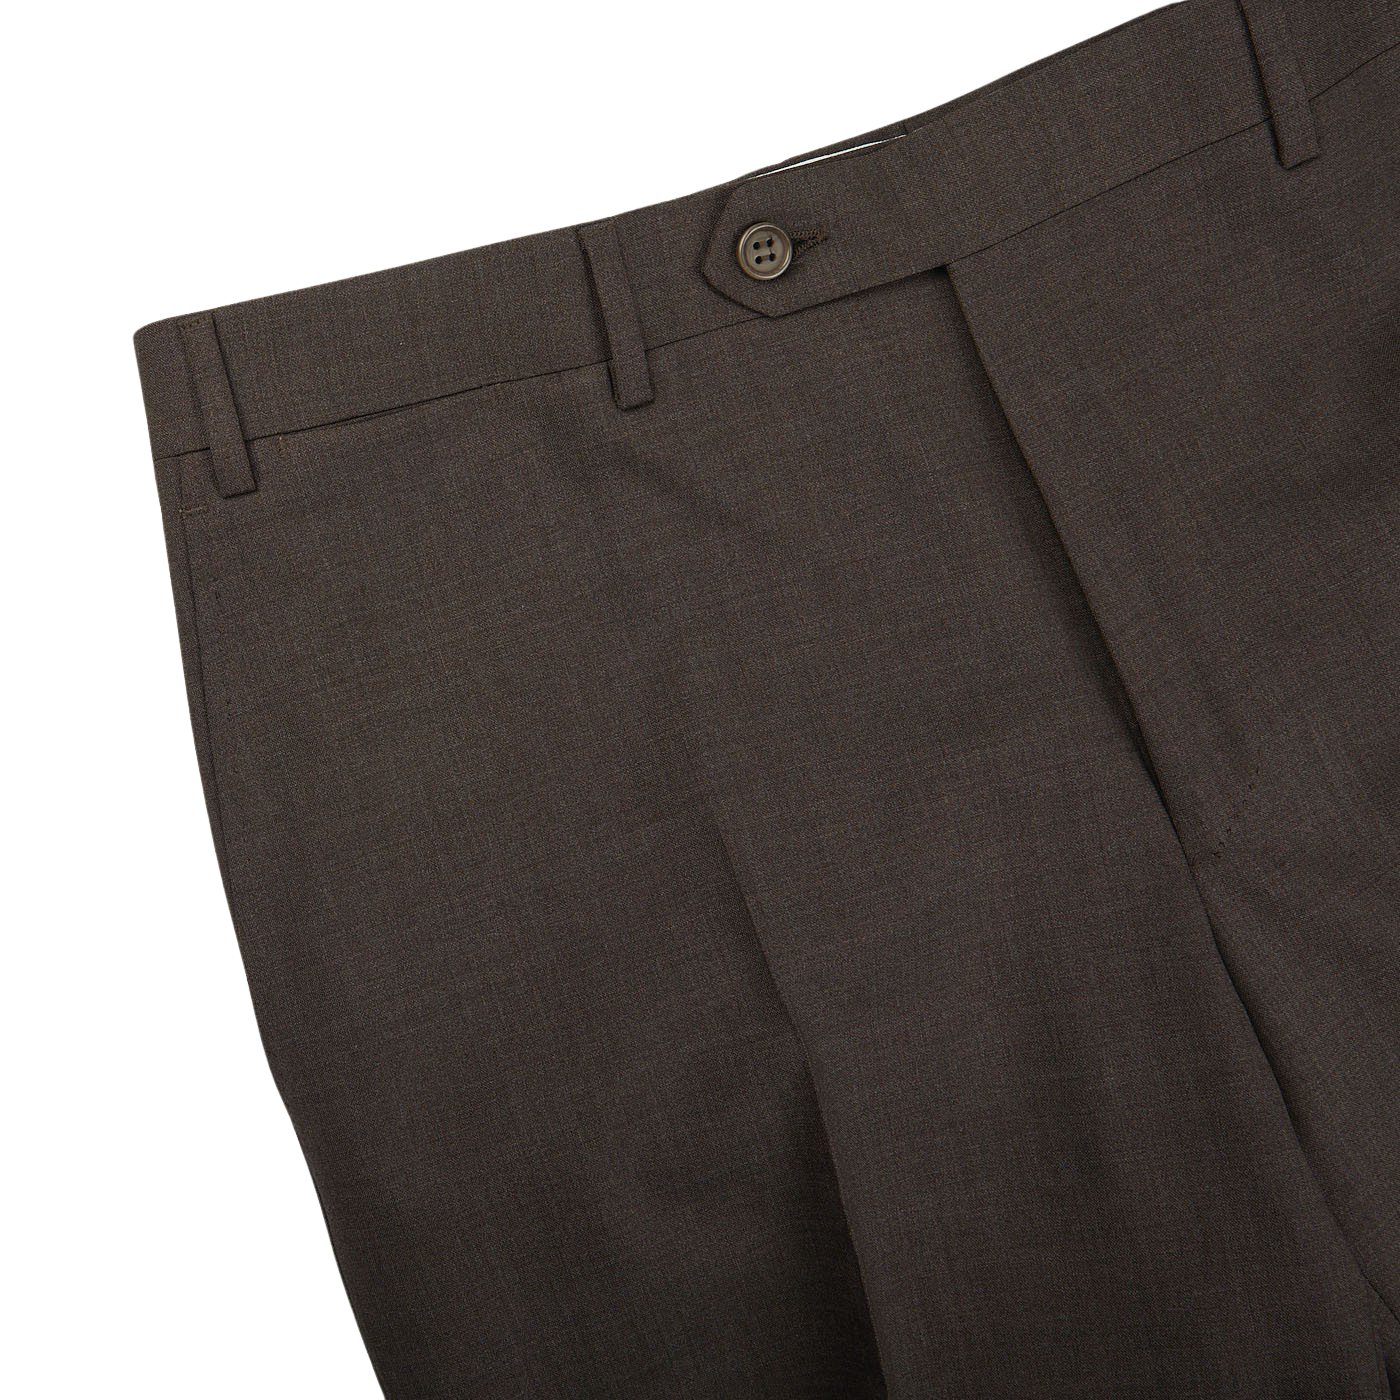 A close up of Canali Matte Brown Wool Stretch Flat Front Trousers.